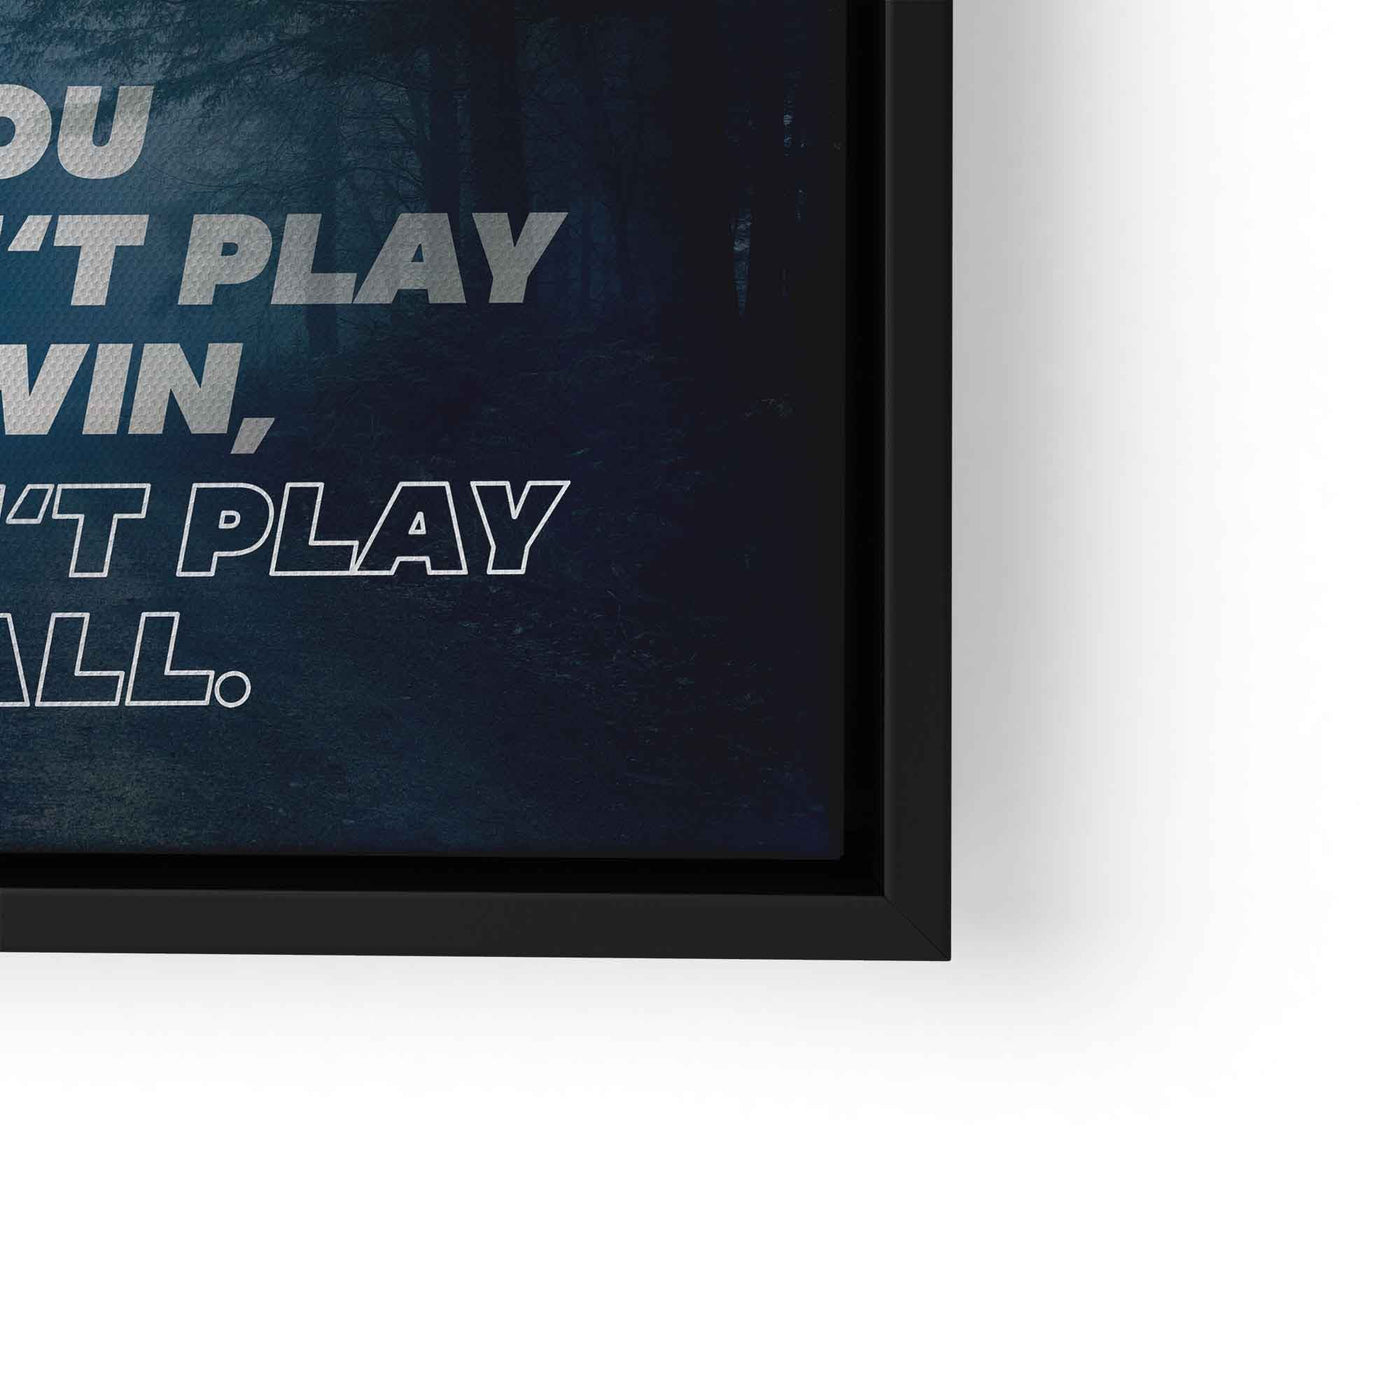 Play to win